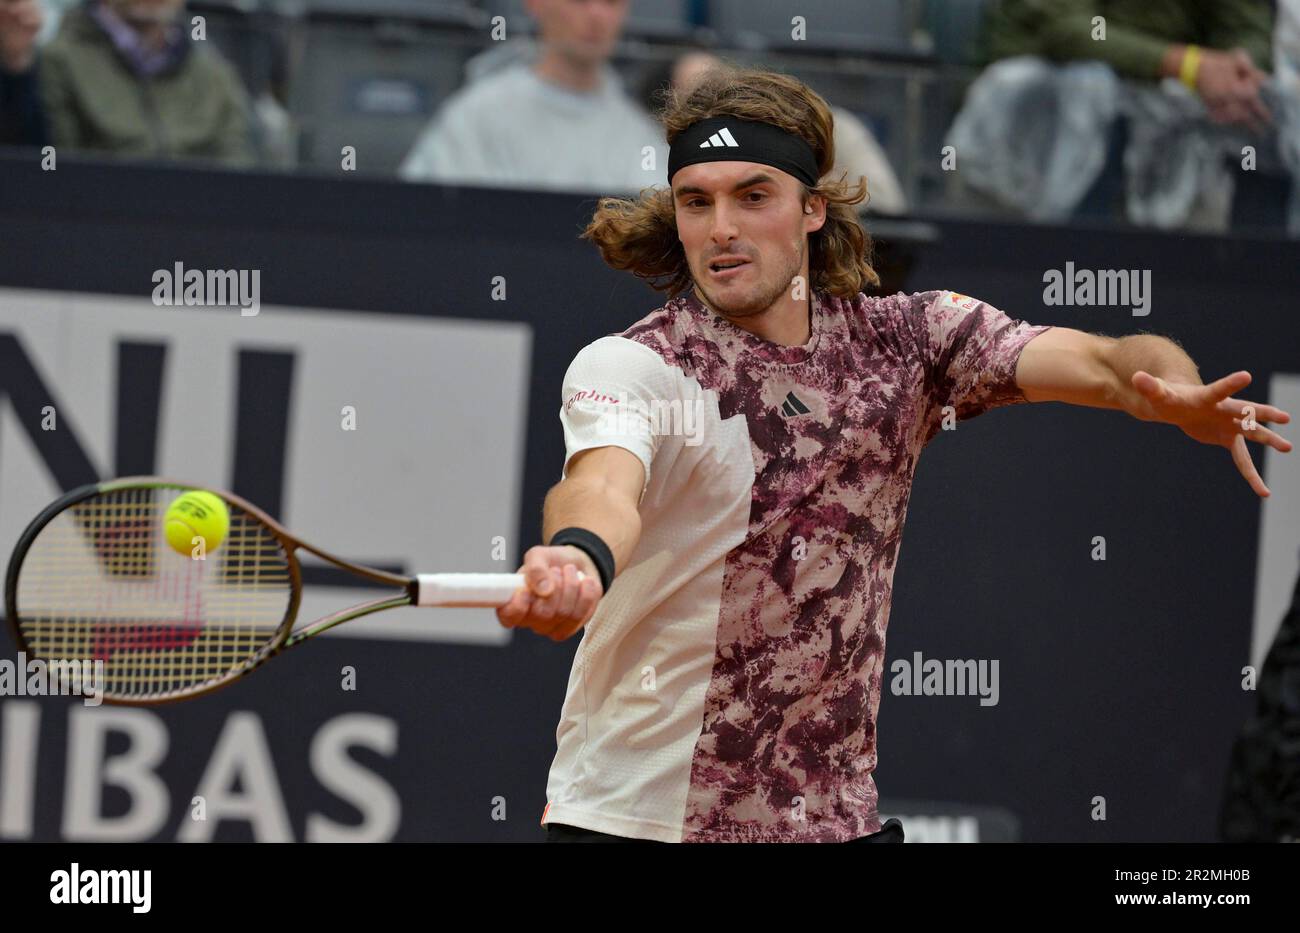 May 20, 2023, ROME Stefanos Tsitsipas of Greece in action during his mens singles semi final match against Daniil Medvedev of Russia (not pictured) at the Italian Open tennis tournament in Rome,